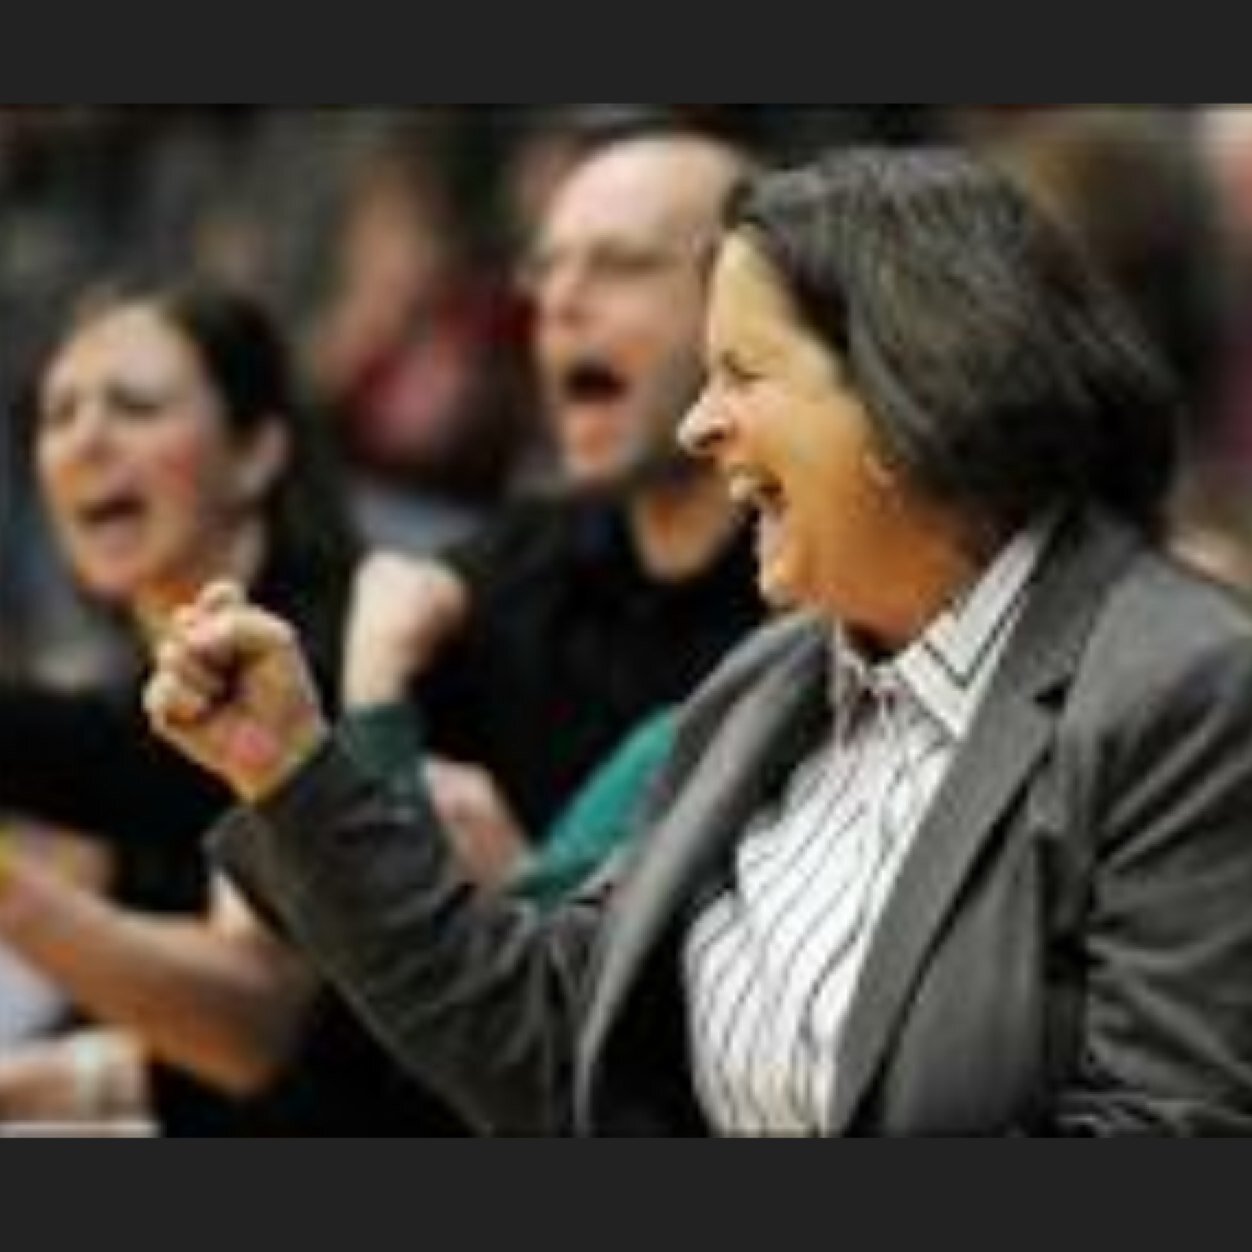 Head Women's Basketball coach and Assistant Athletic Director at St. Norbert College